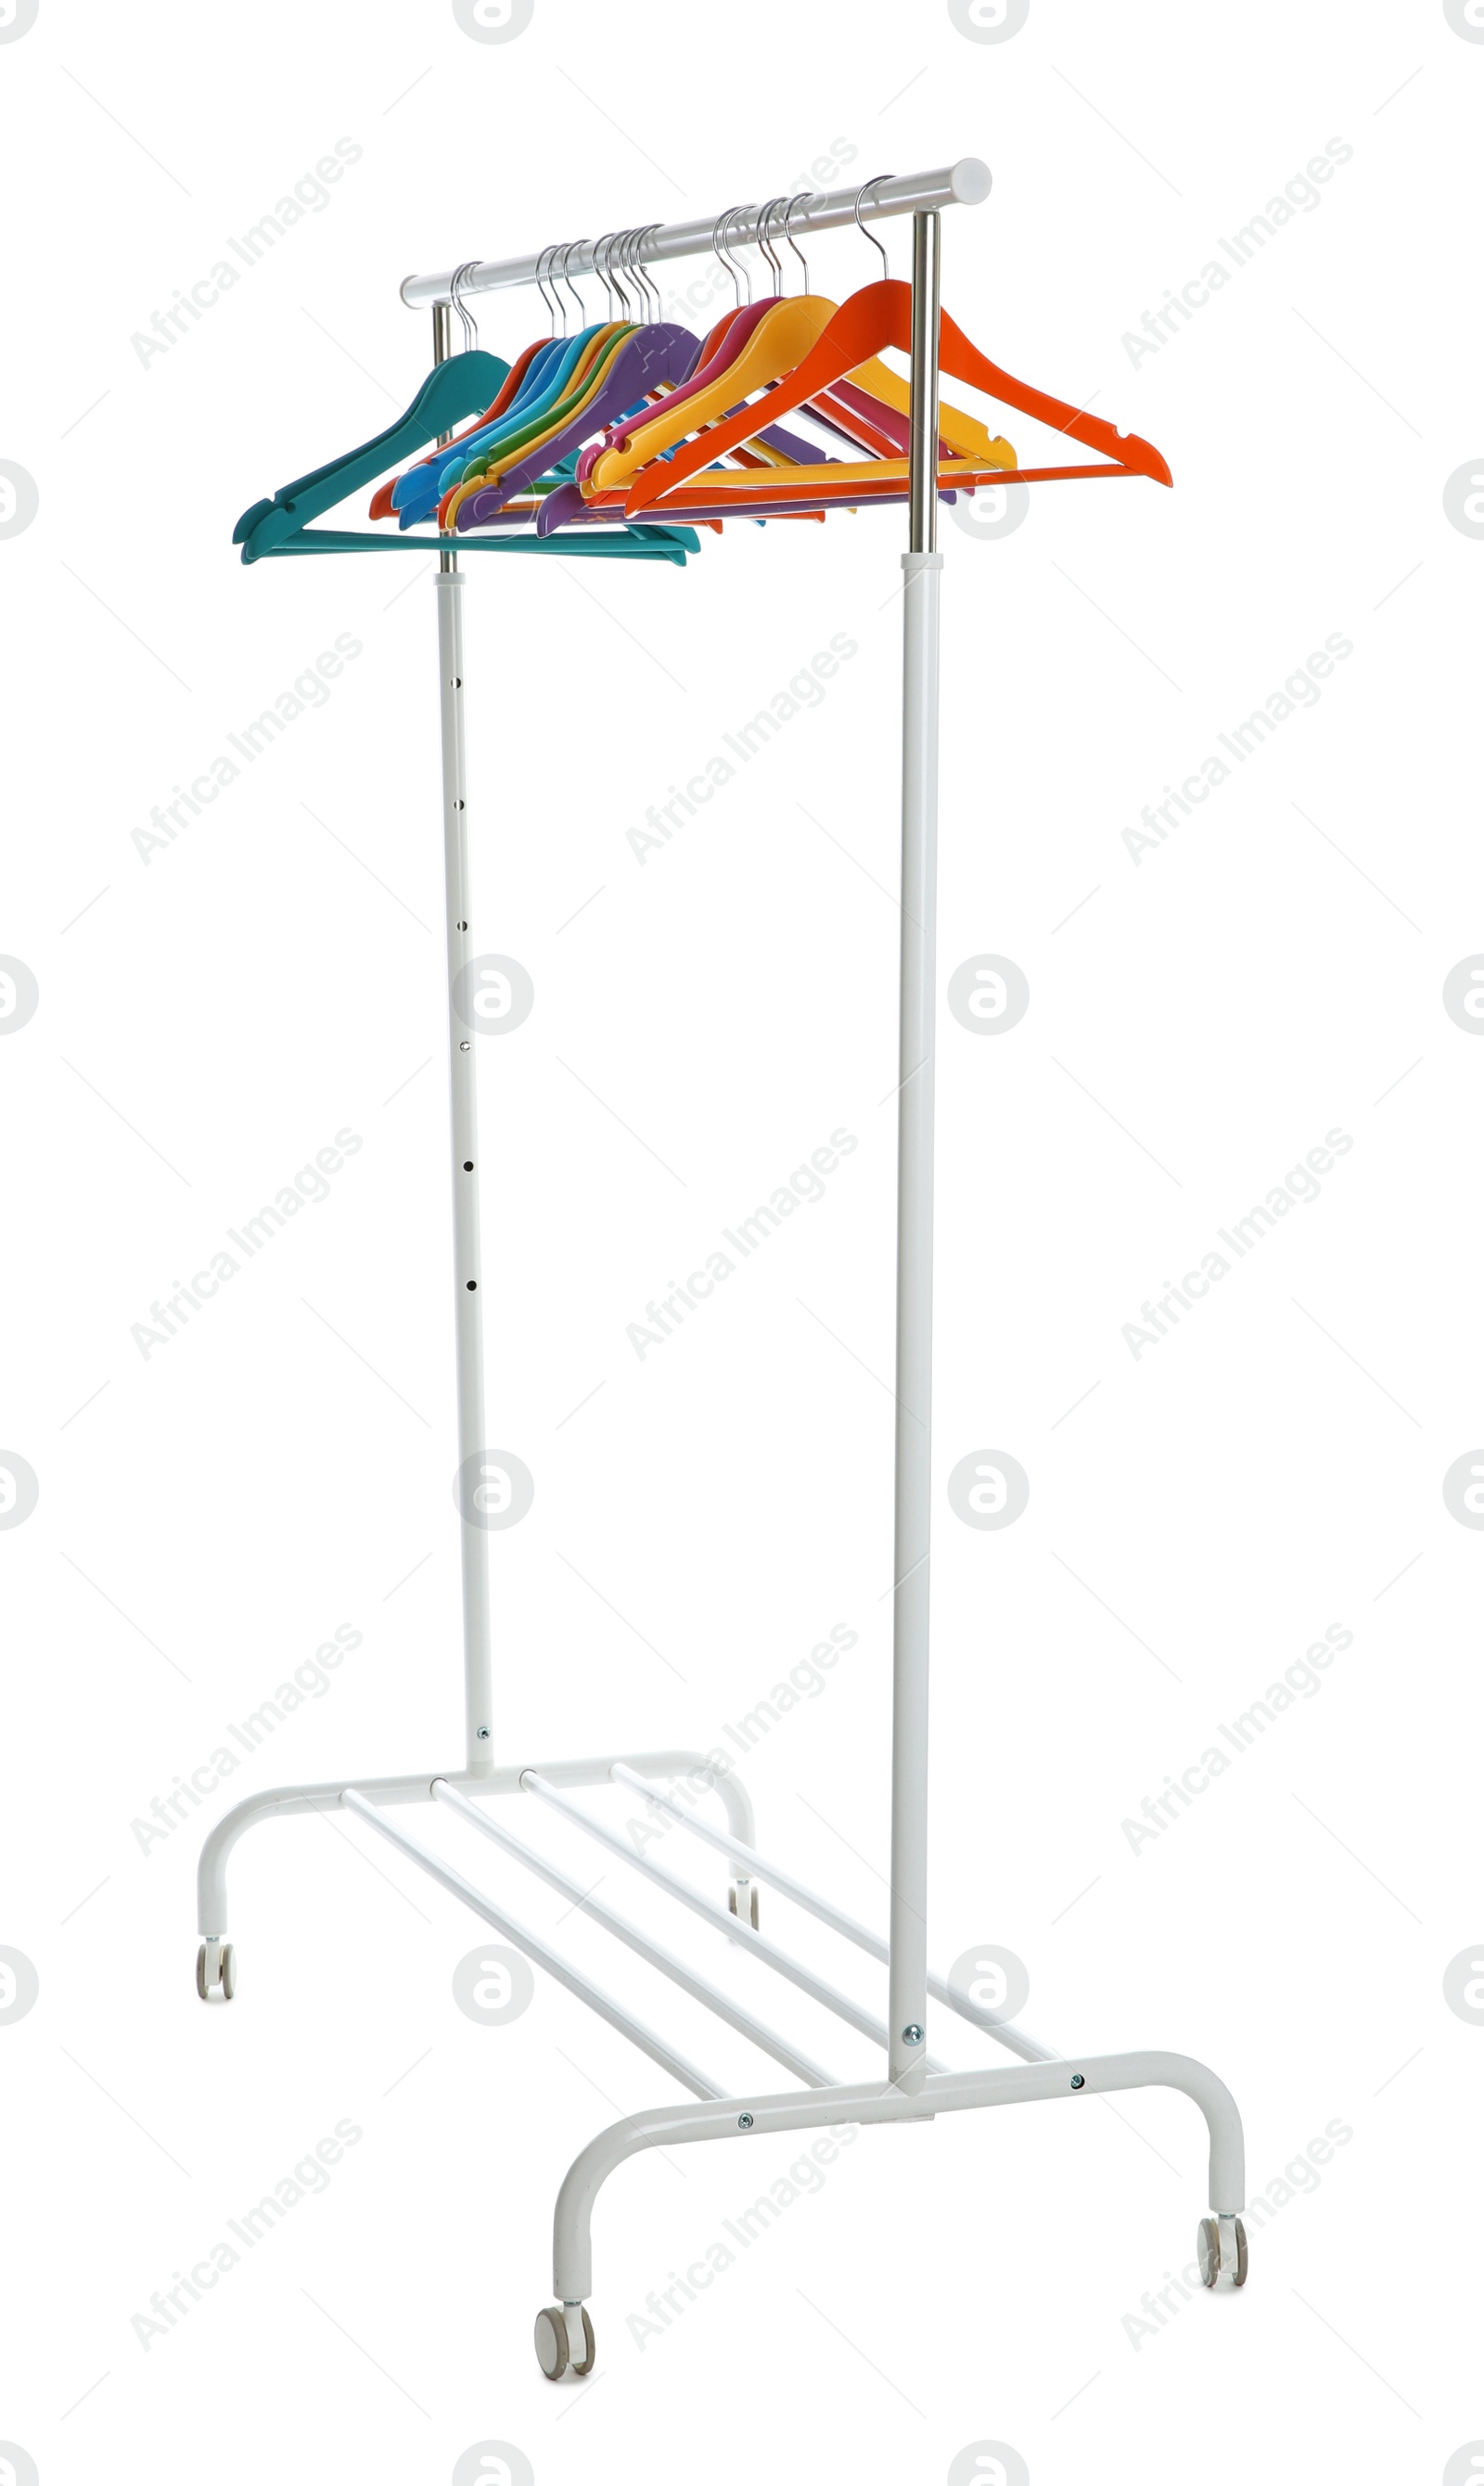 Photo of Wardrobe rack with different color hangers isolated on white